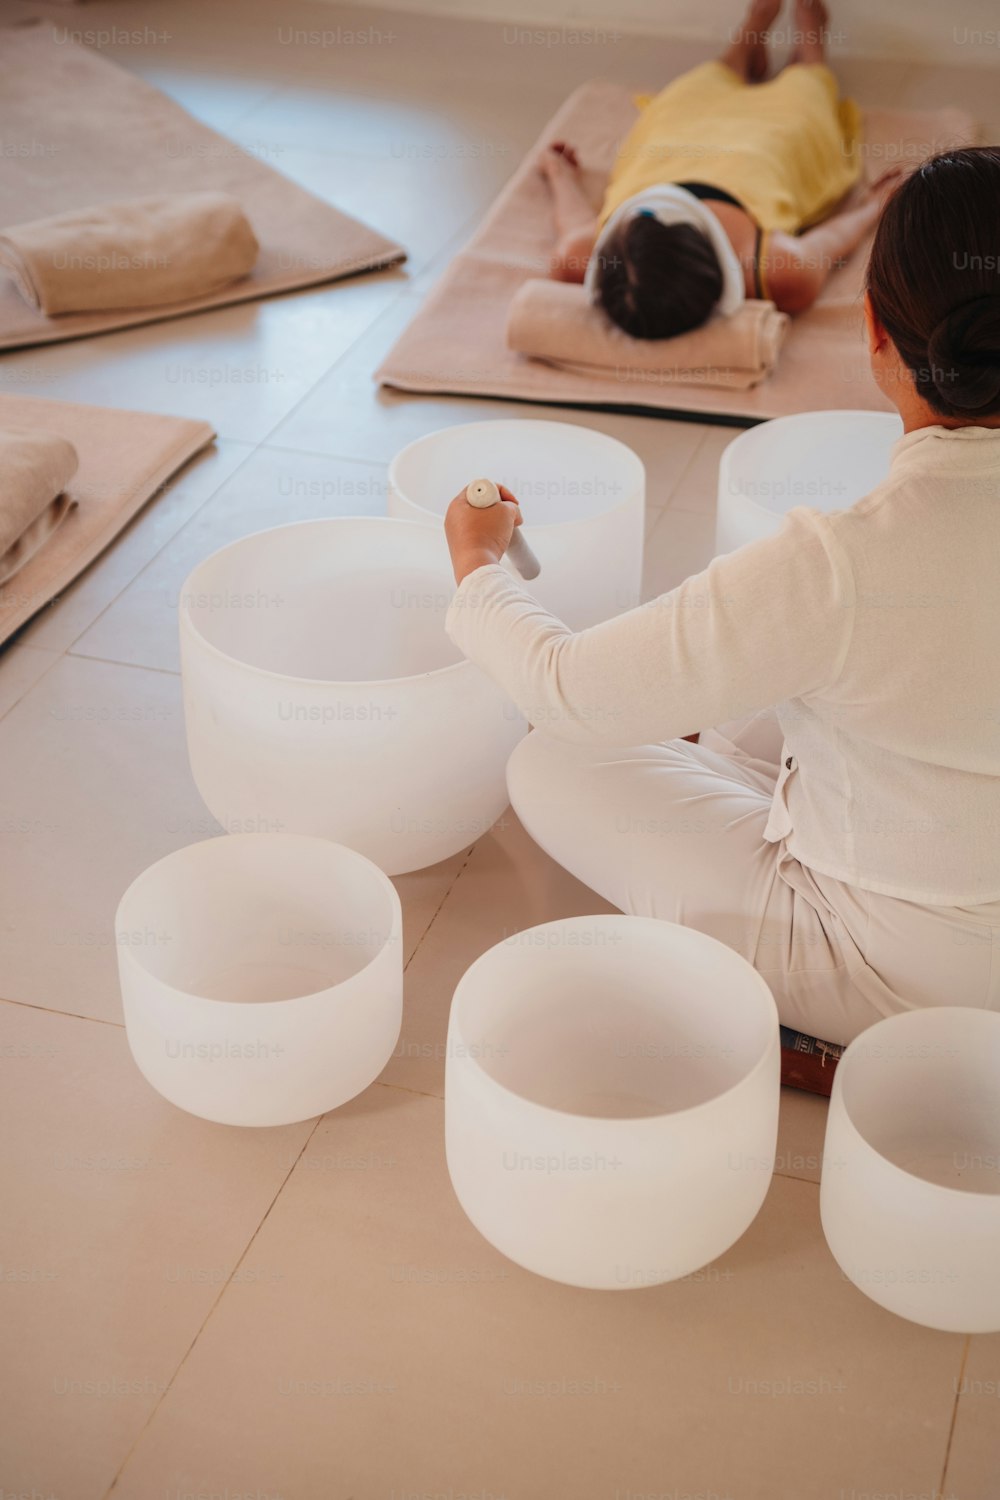 a woman is sitting on the floor with her hands on a bowl